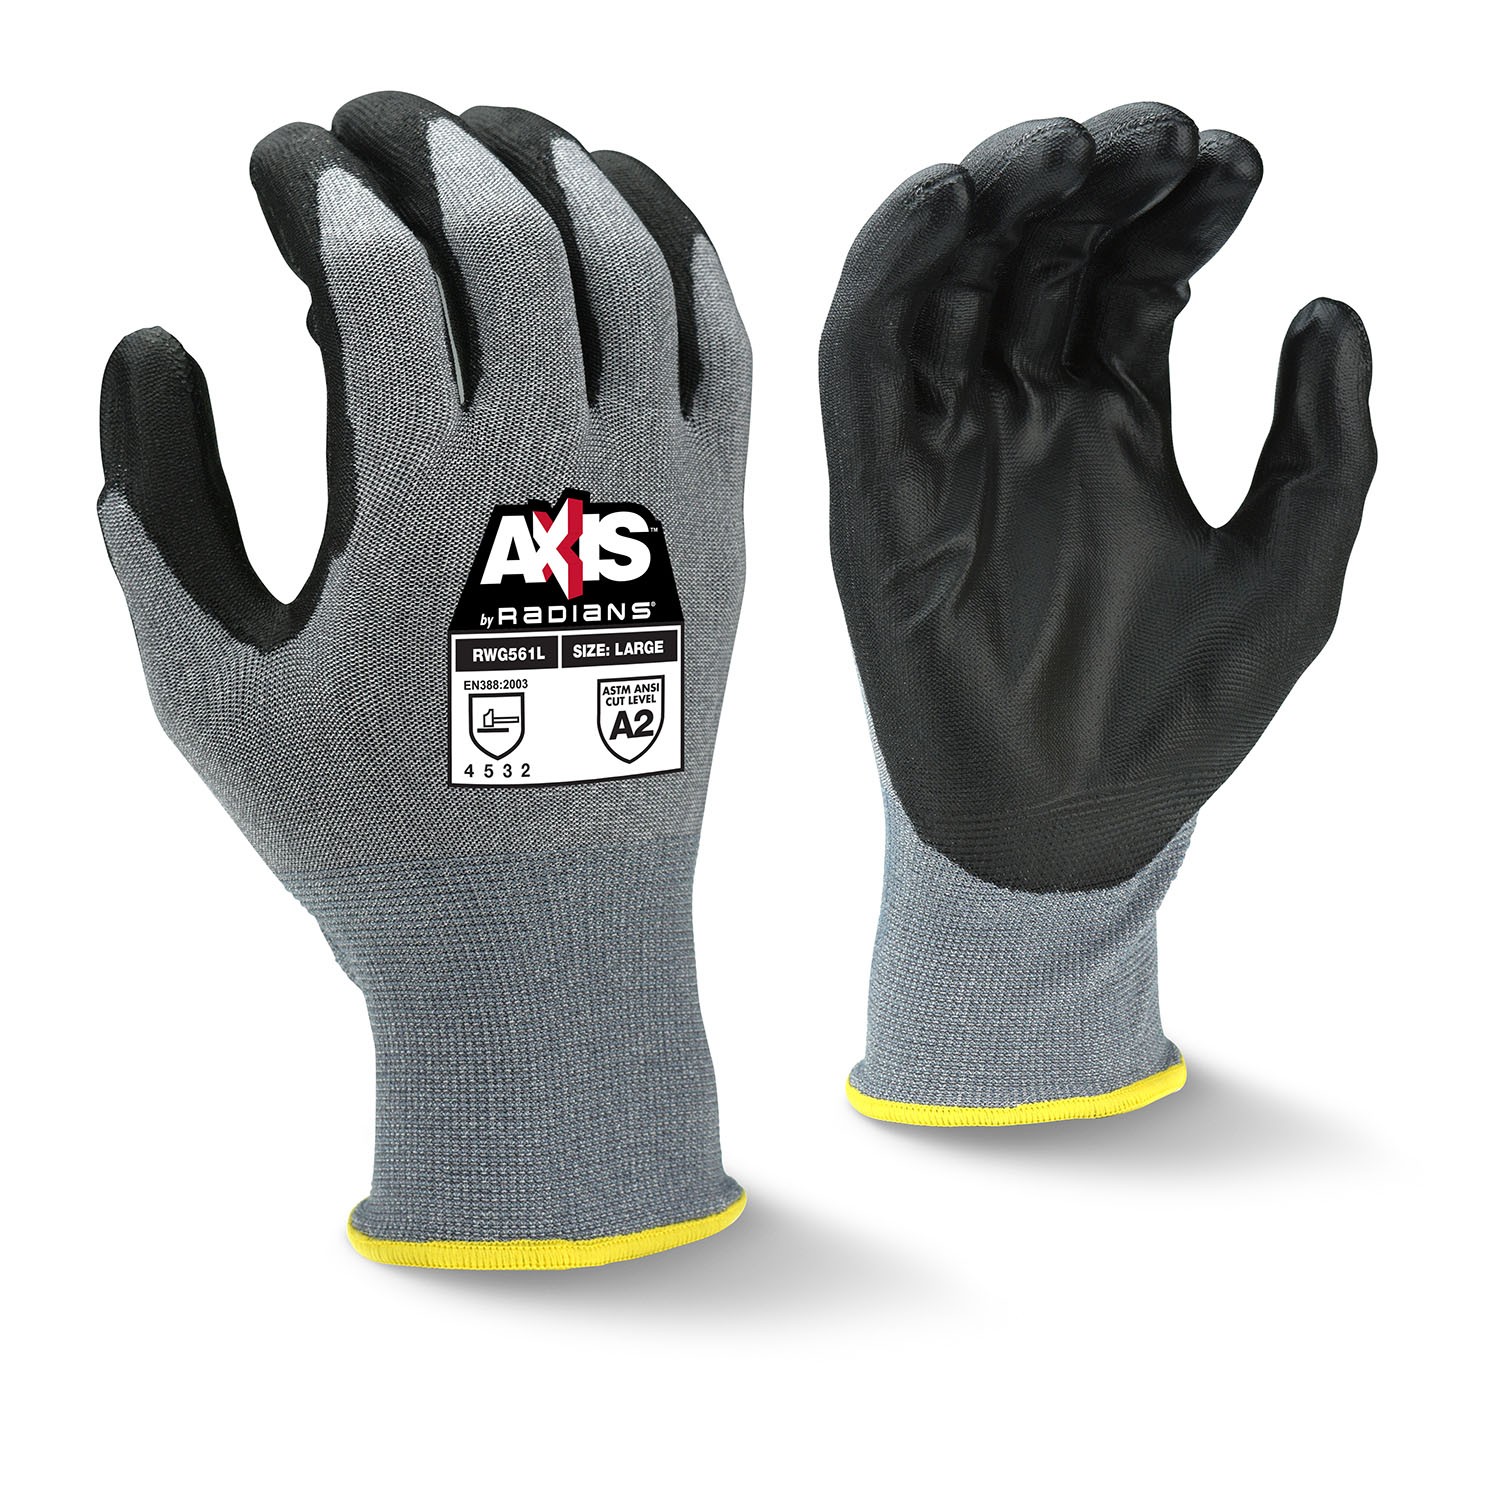 AXIS™ Cut Protection Level A2 PU Coated Glove (#RWG561)